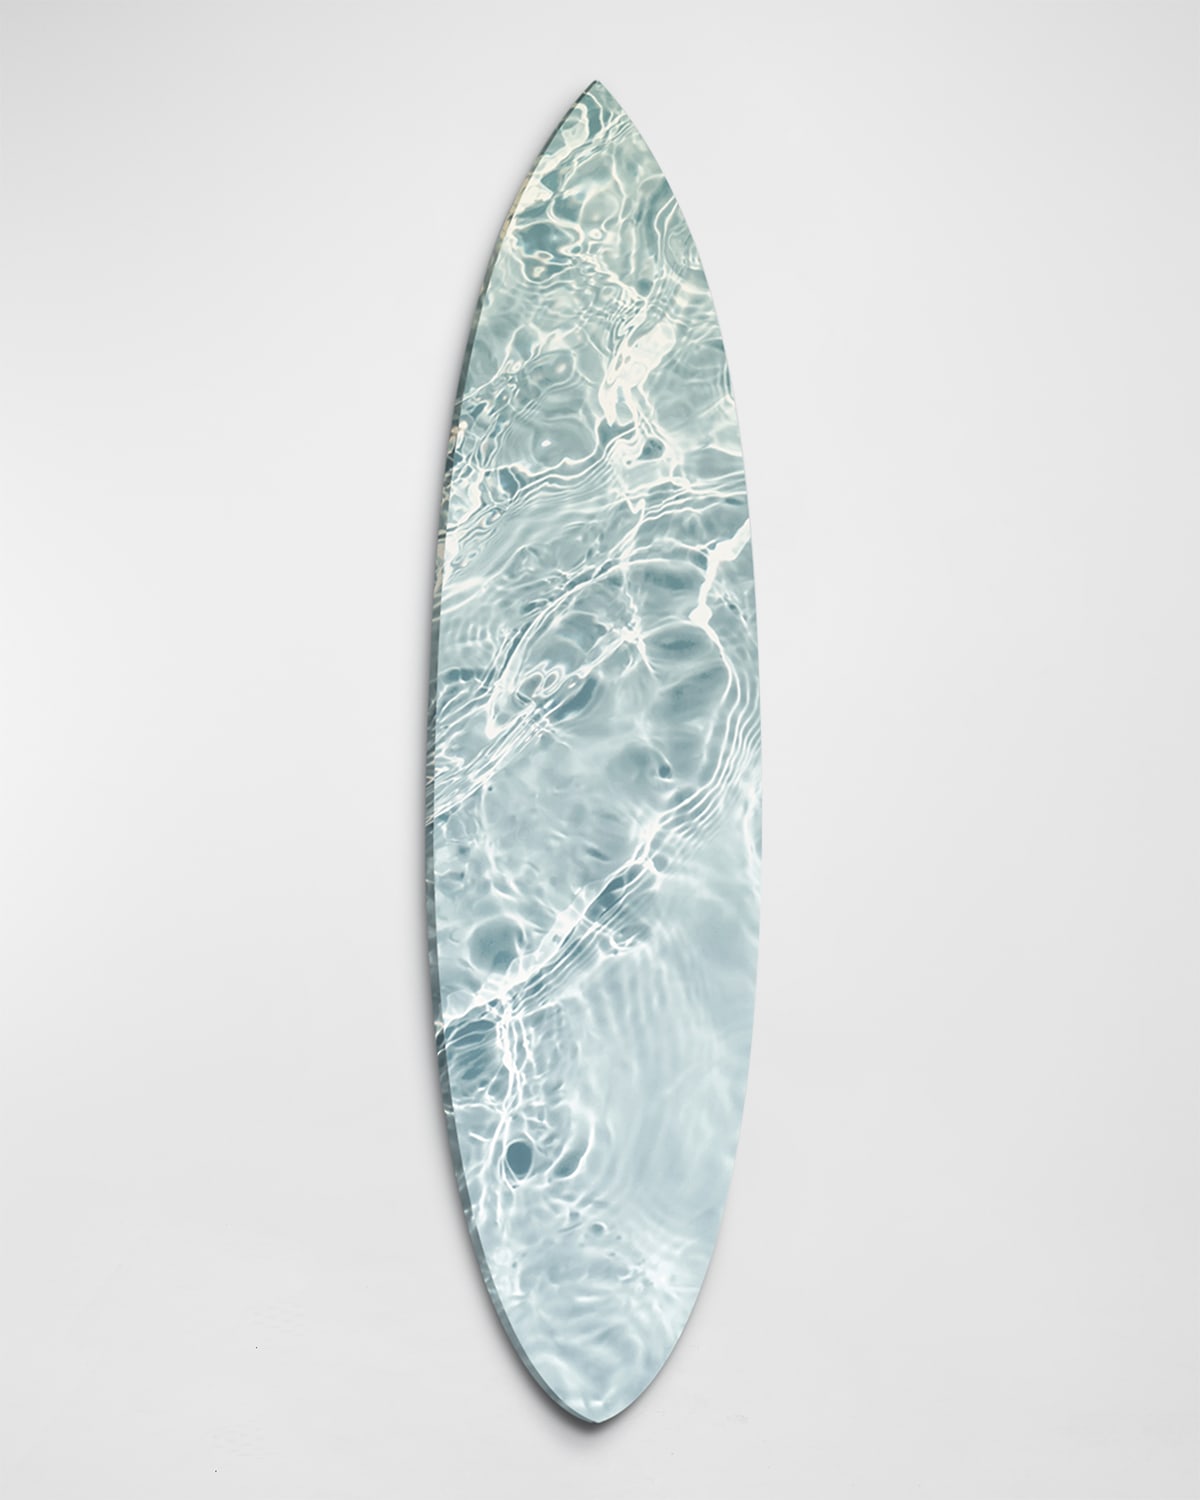 Shop The Oliver Gal Artist Co. Decorative Surfboard Art In White